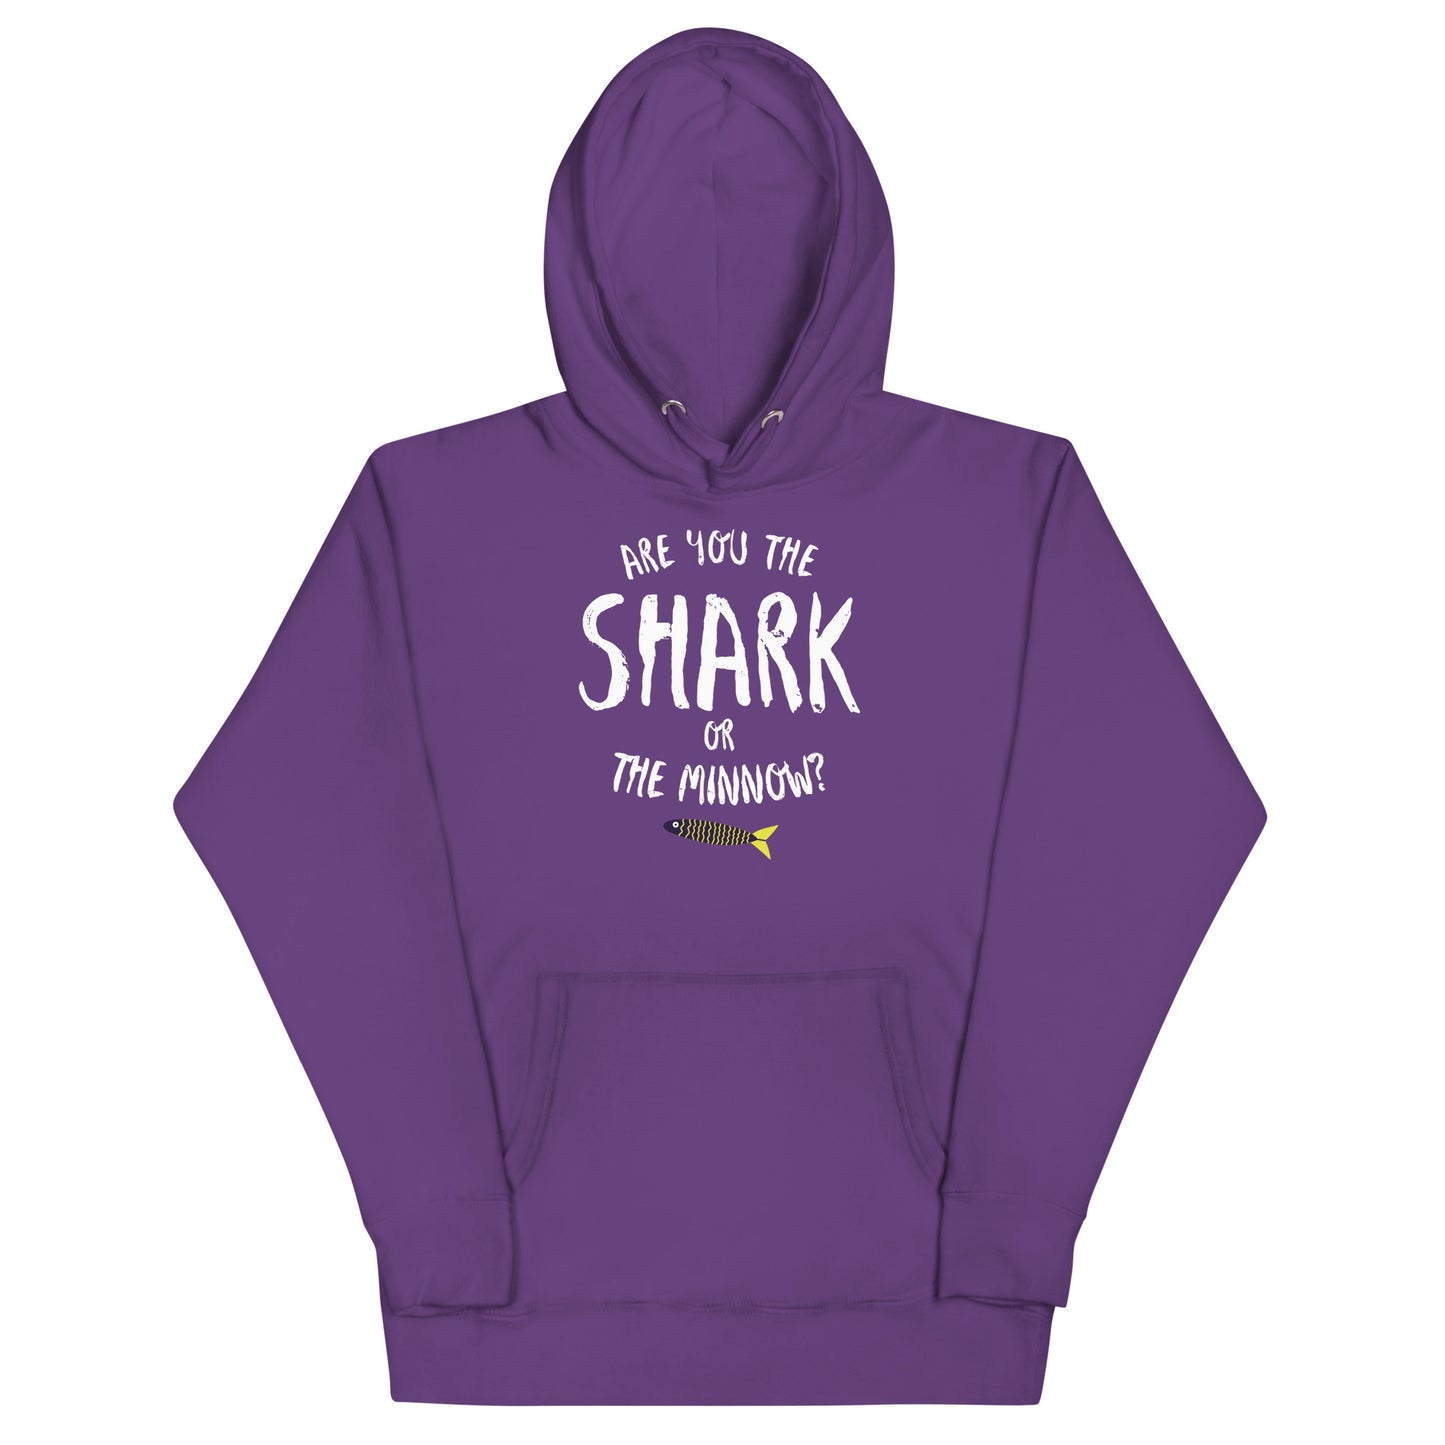 Are you the SHARK or the minnow? Unisex Hoodie (white lettering)